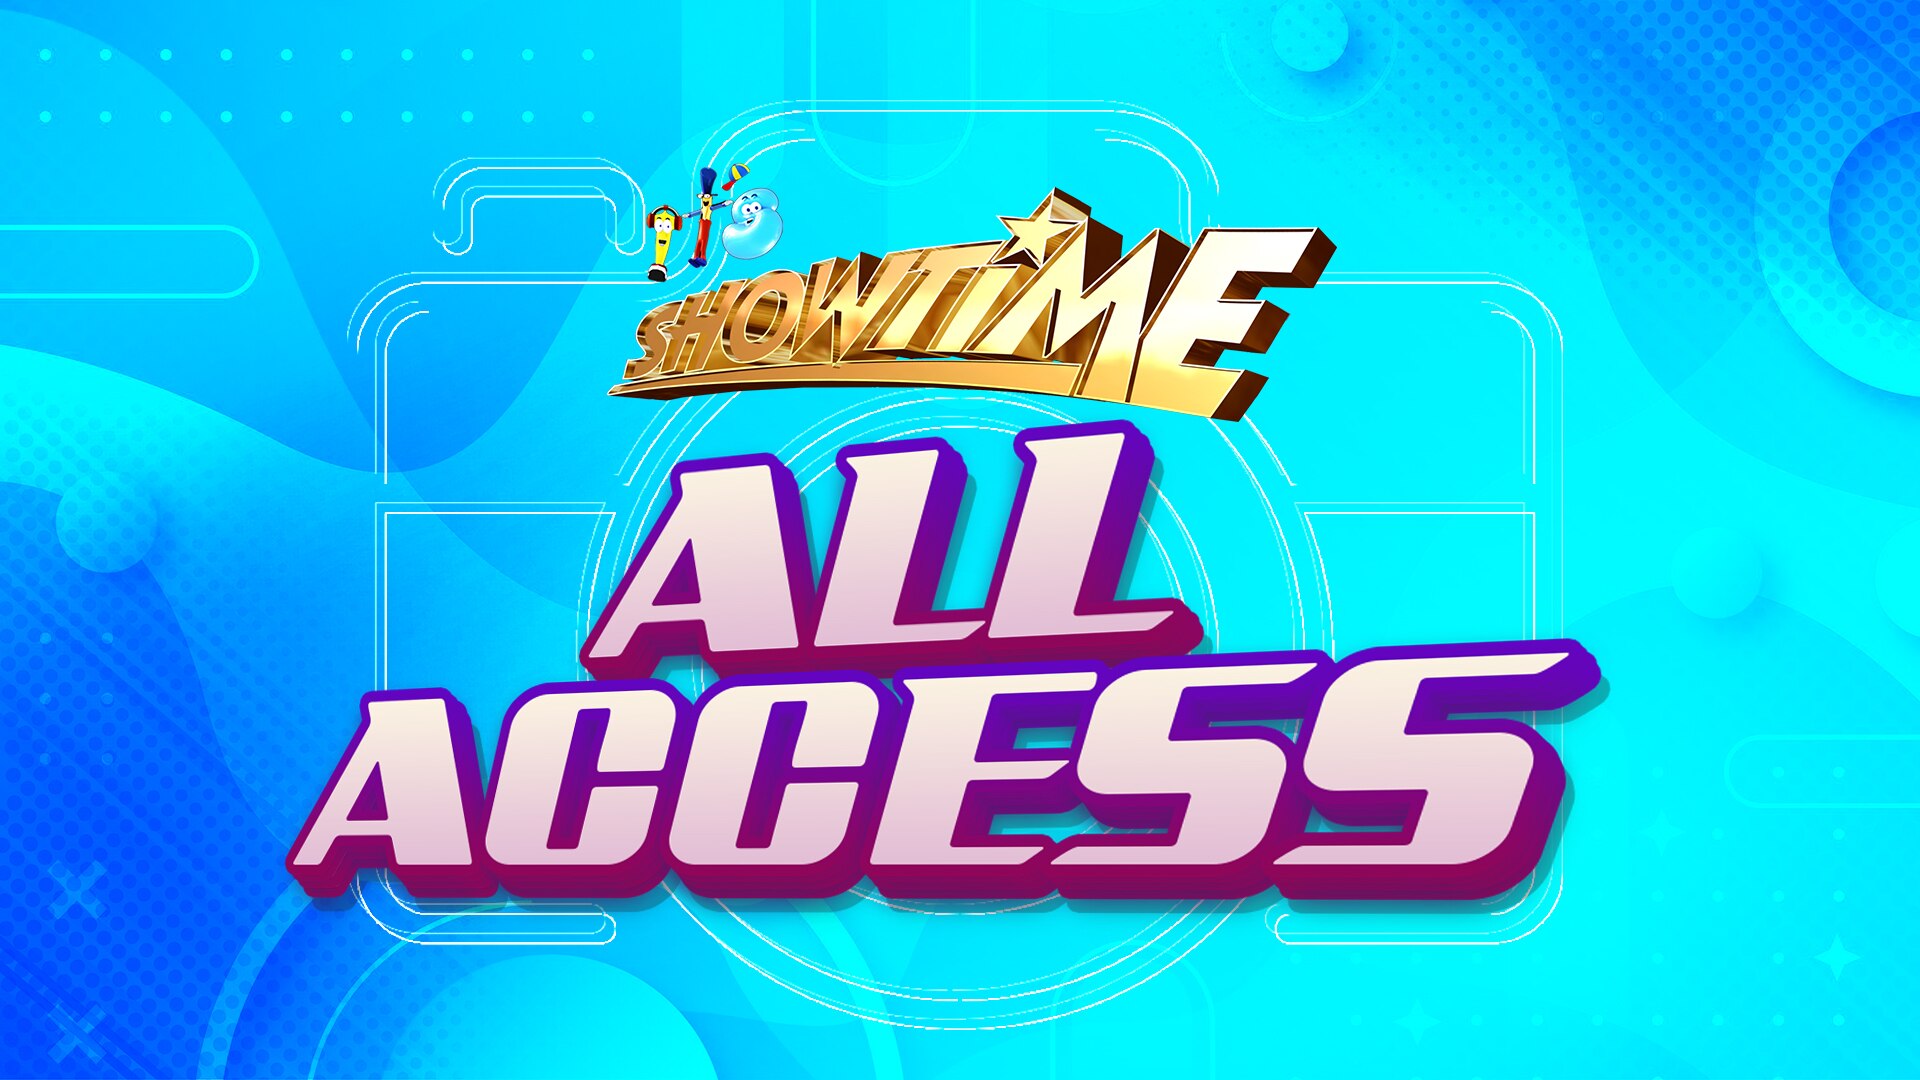 It's Showtime All Access